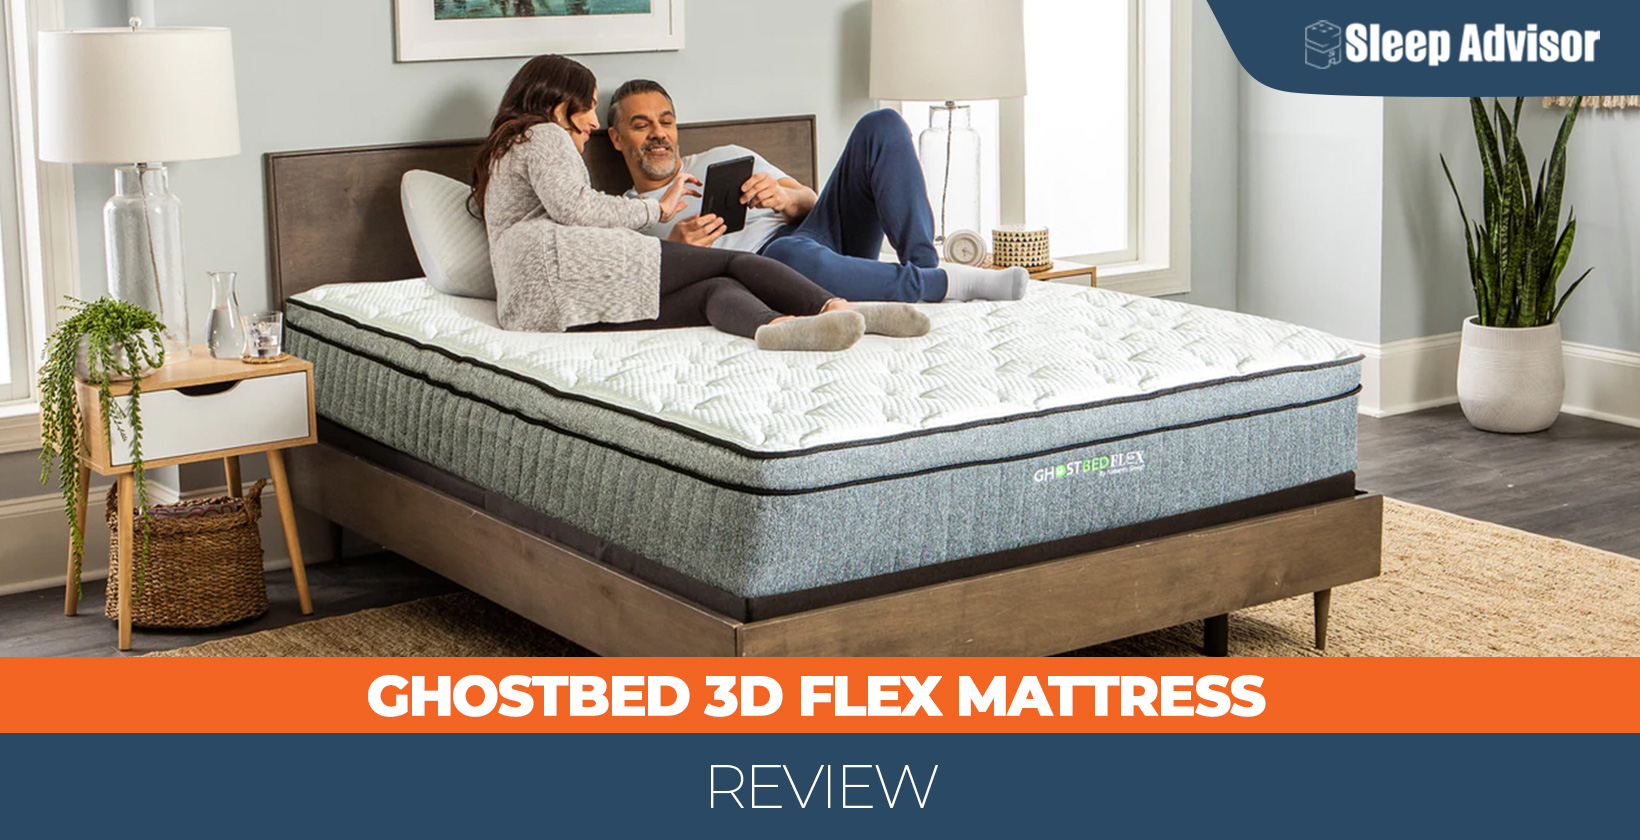 Our overview of the GhostBed Flex Mattress